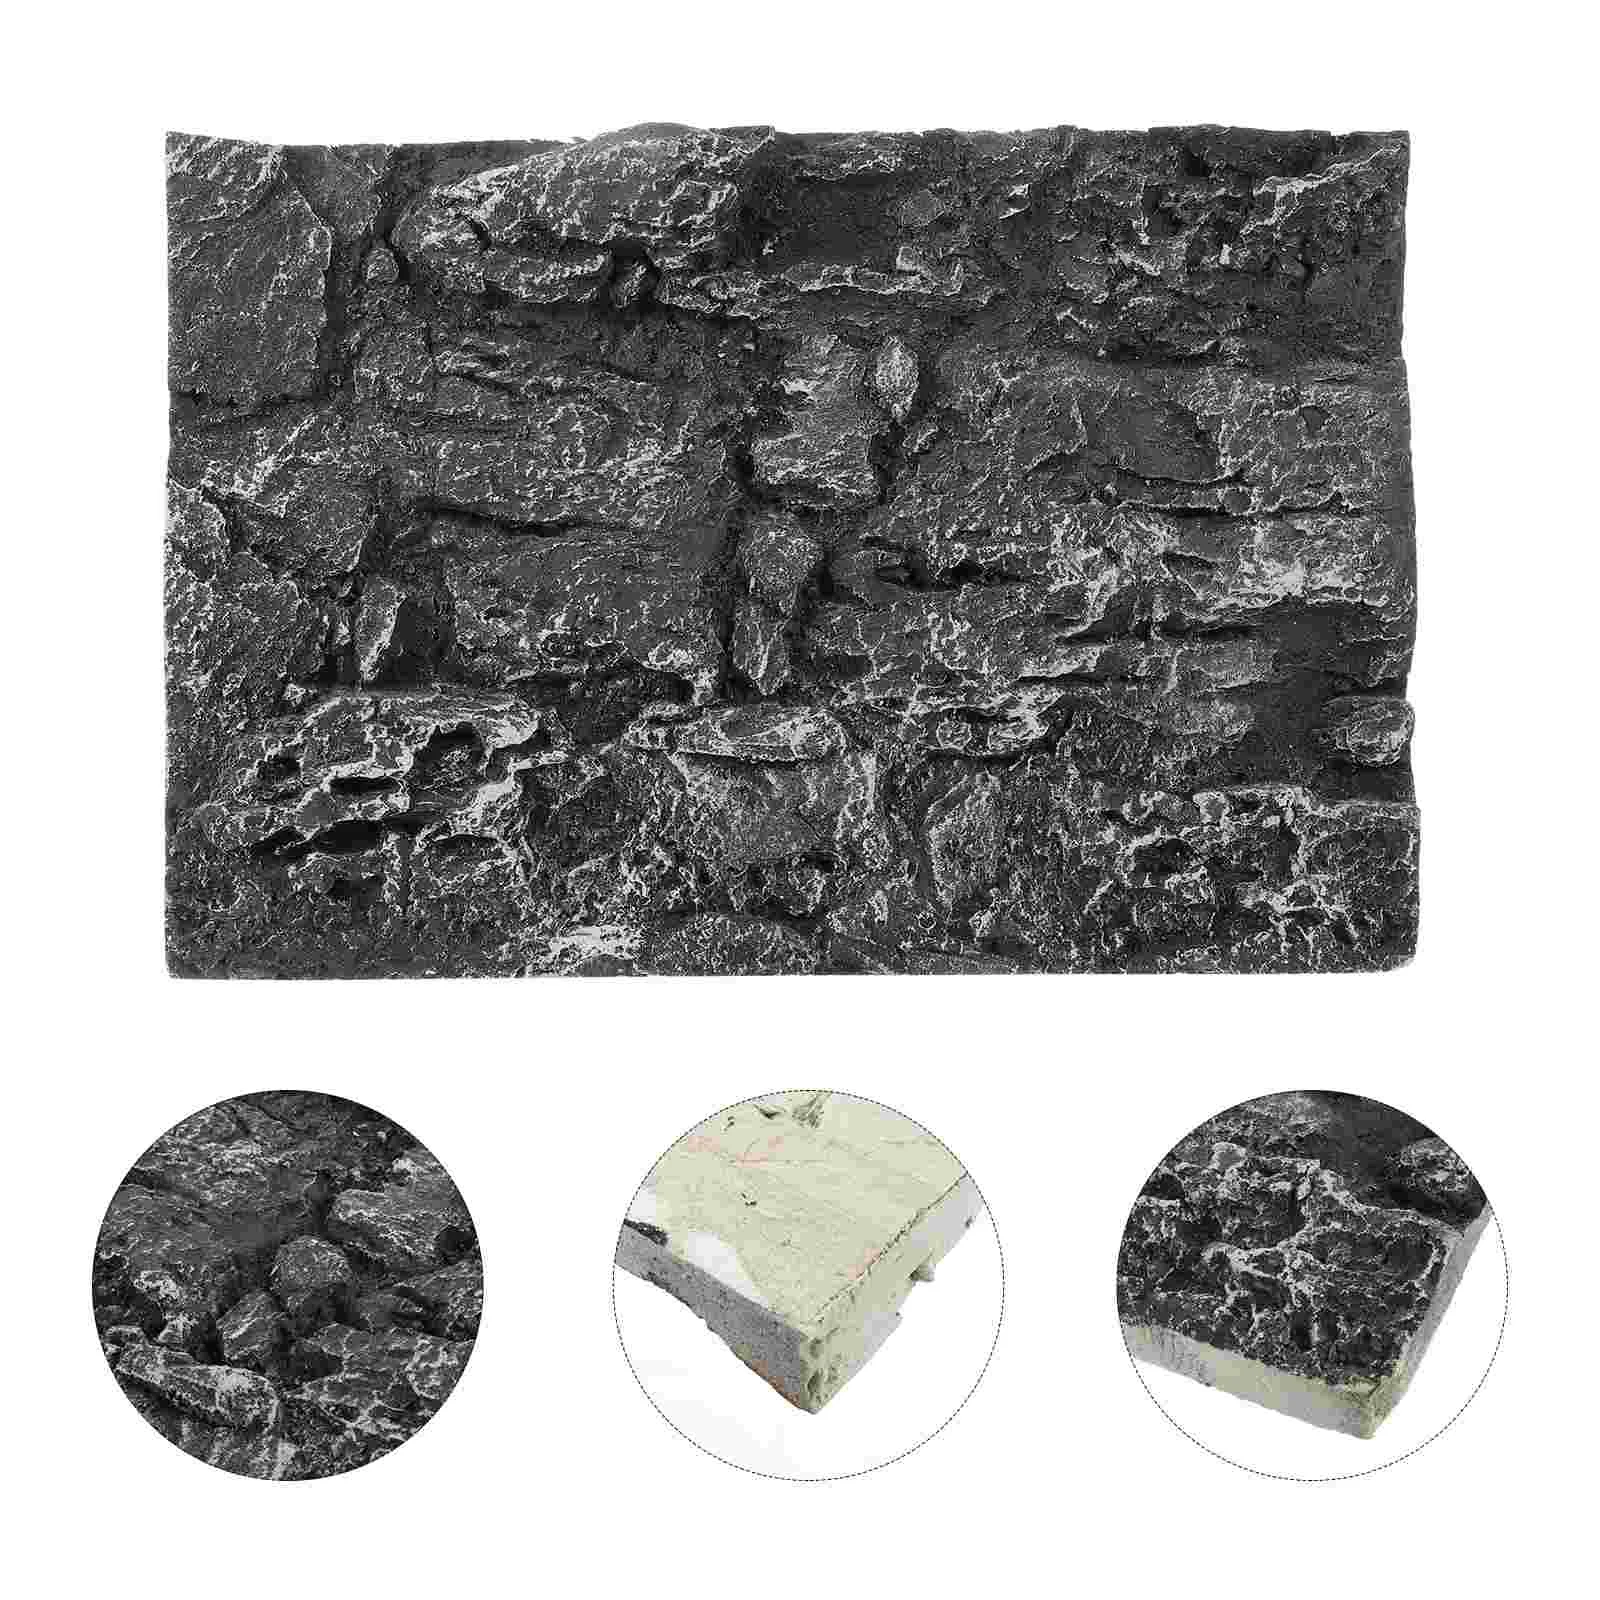 

Terrariums Fish Tank Background Board Glass Containers Reptile Slate Tiles Reptiles Boards Stone Rock Slab